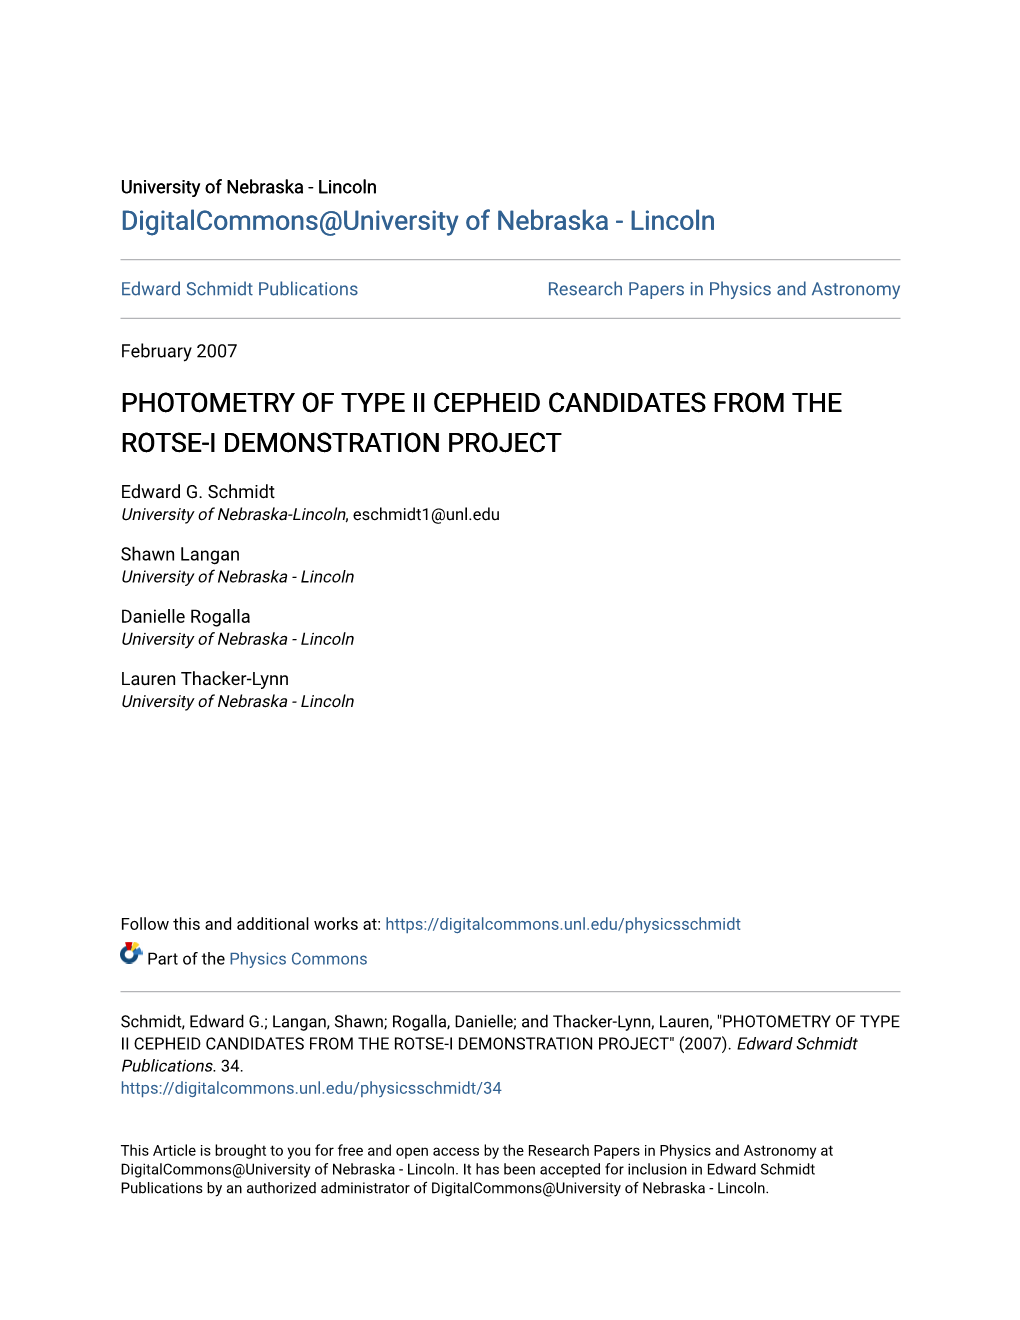 Photometry of Type Ii Cepheid Candidates from the Rotse-I Demonstration Project